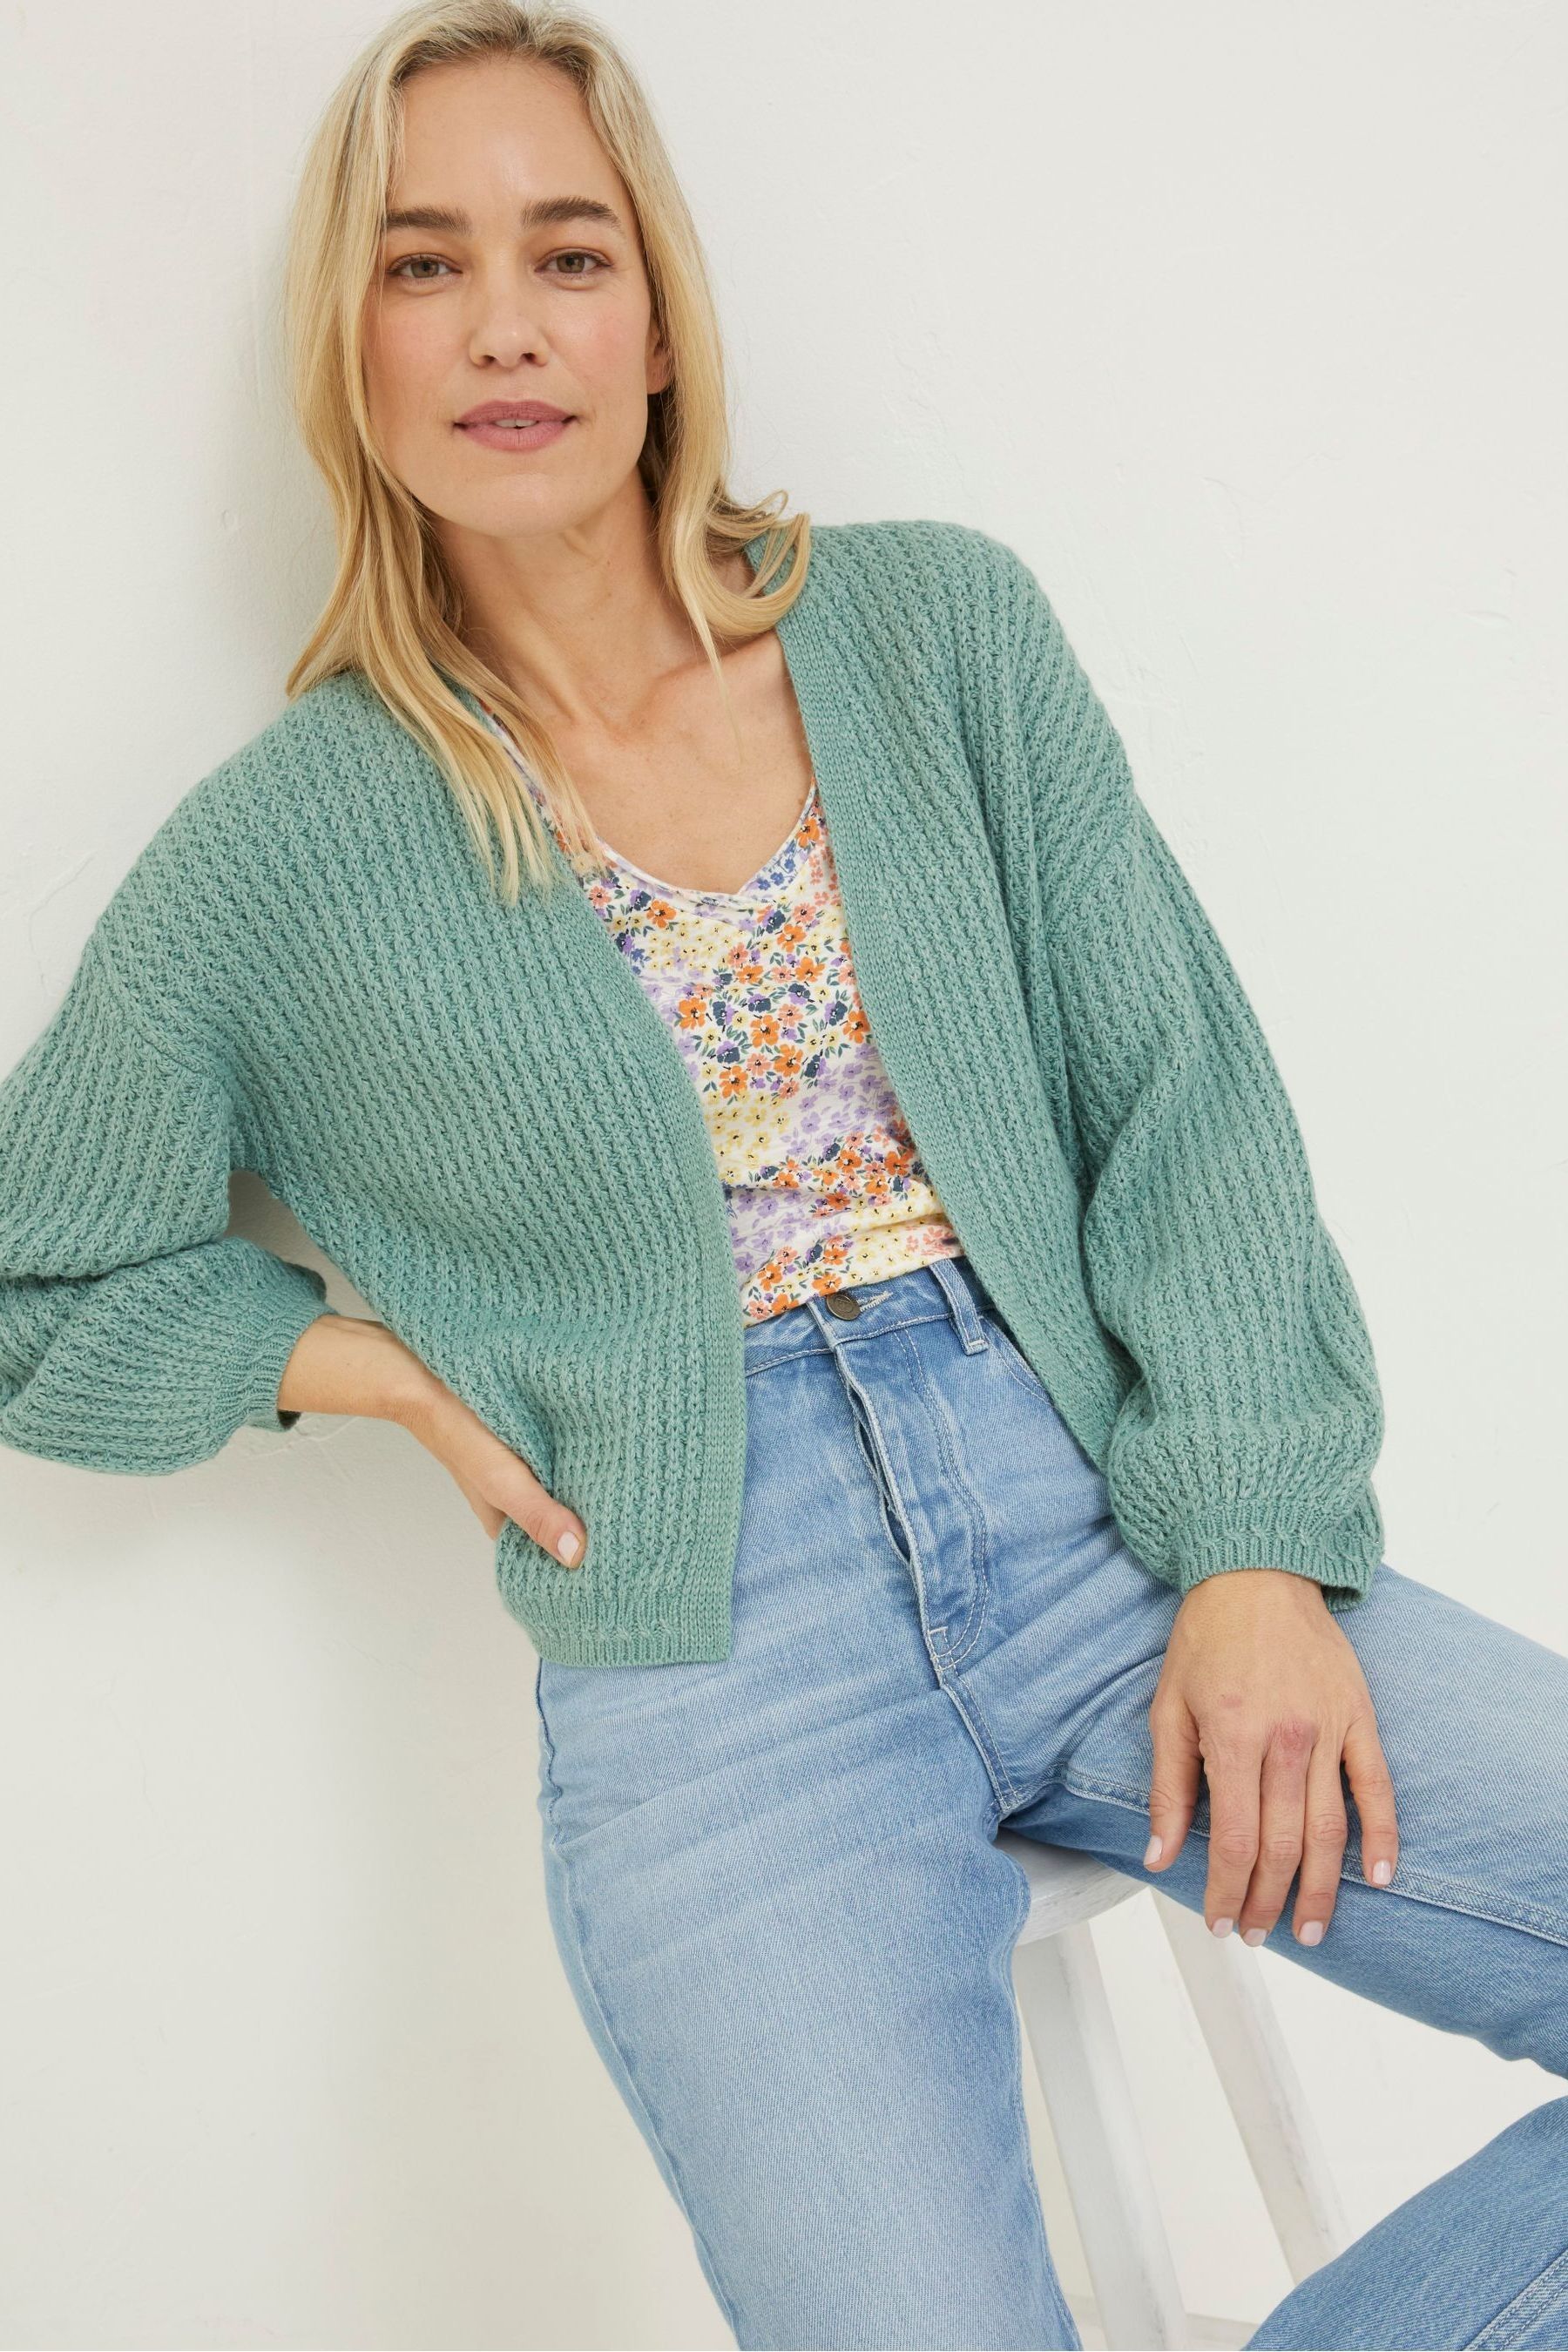 Buy FatFace Anna Cardigan from the Next UK online shop